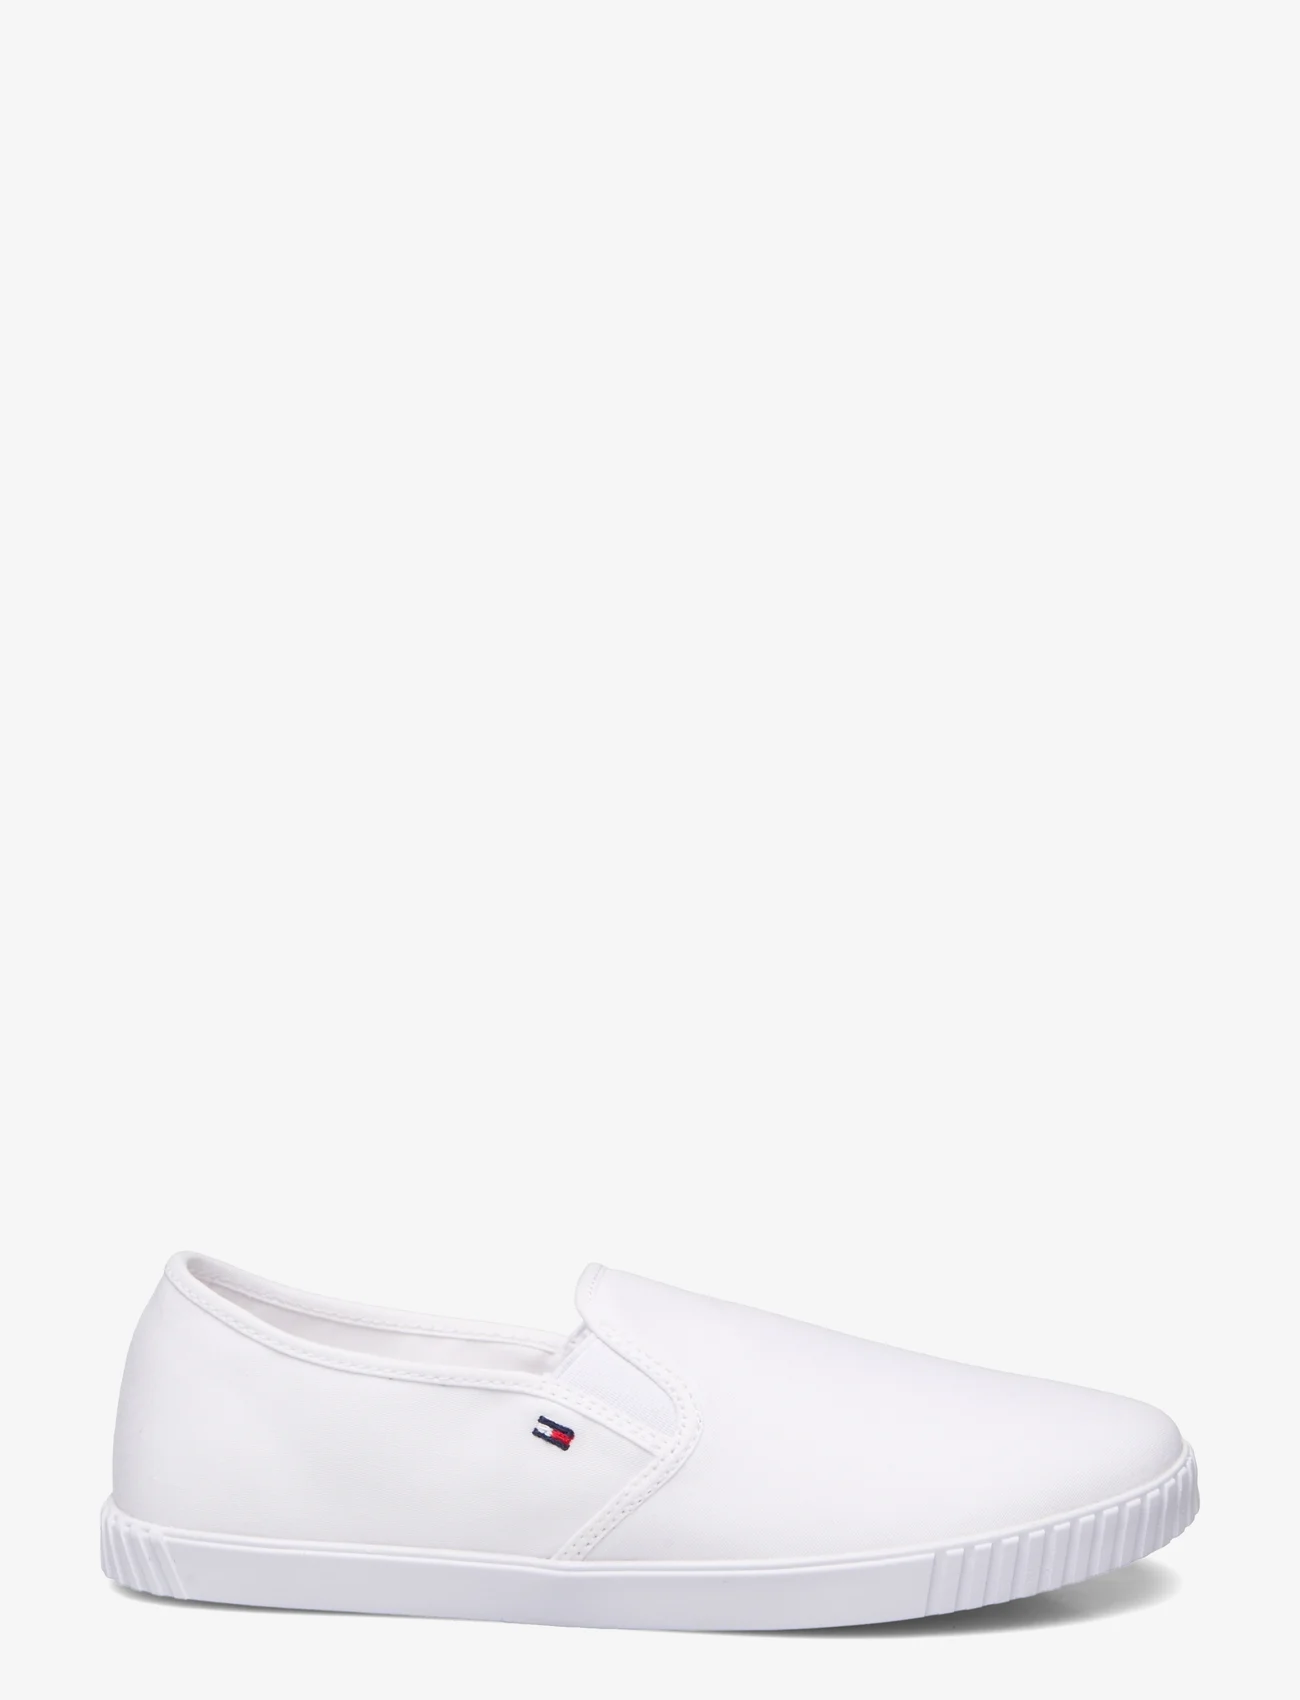 Tommy Hilfiger - CANVAS SLIP-ON SNEAKER - sneakers - white - 1